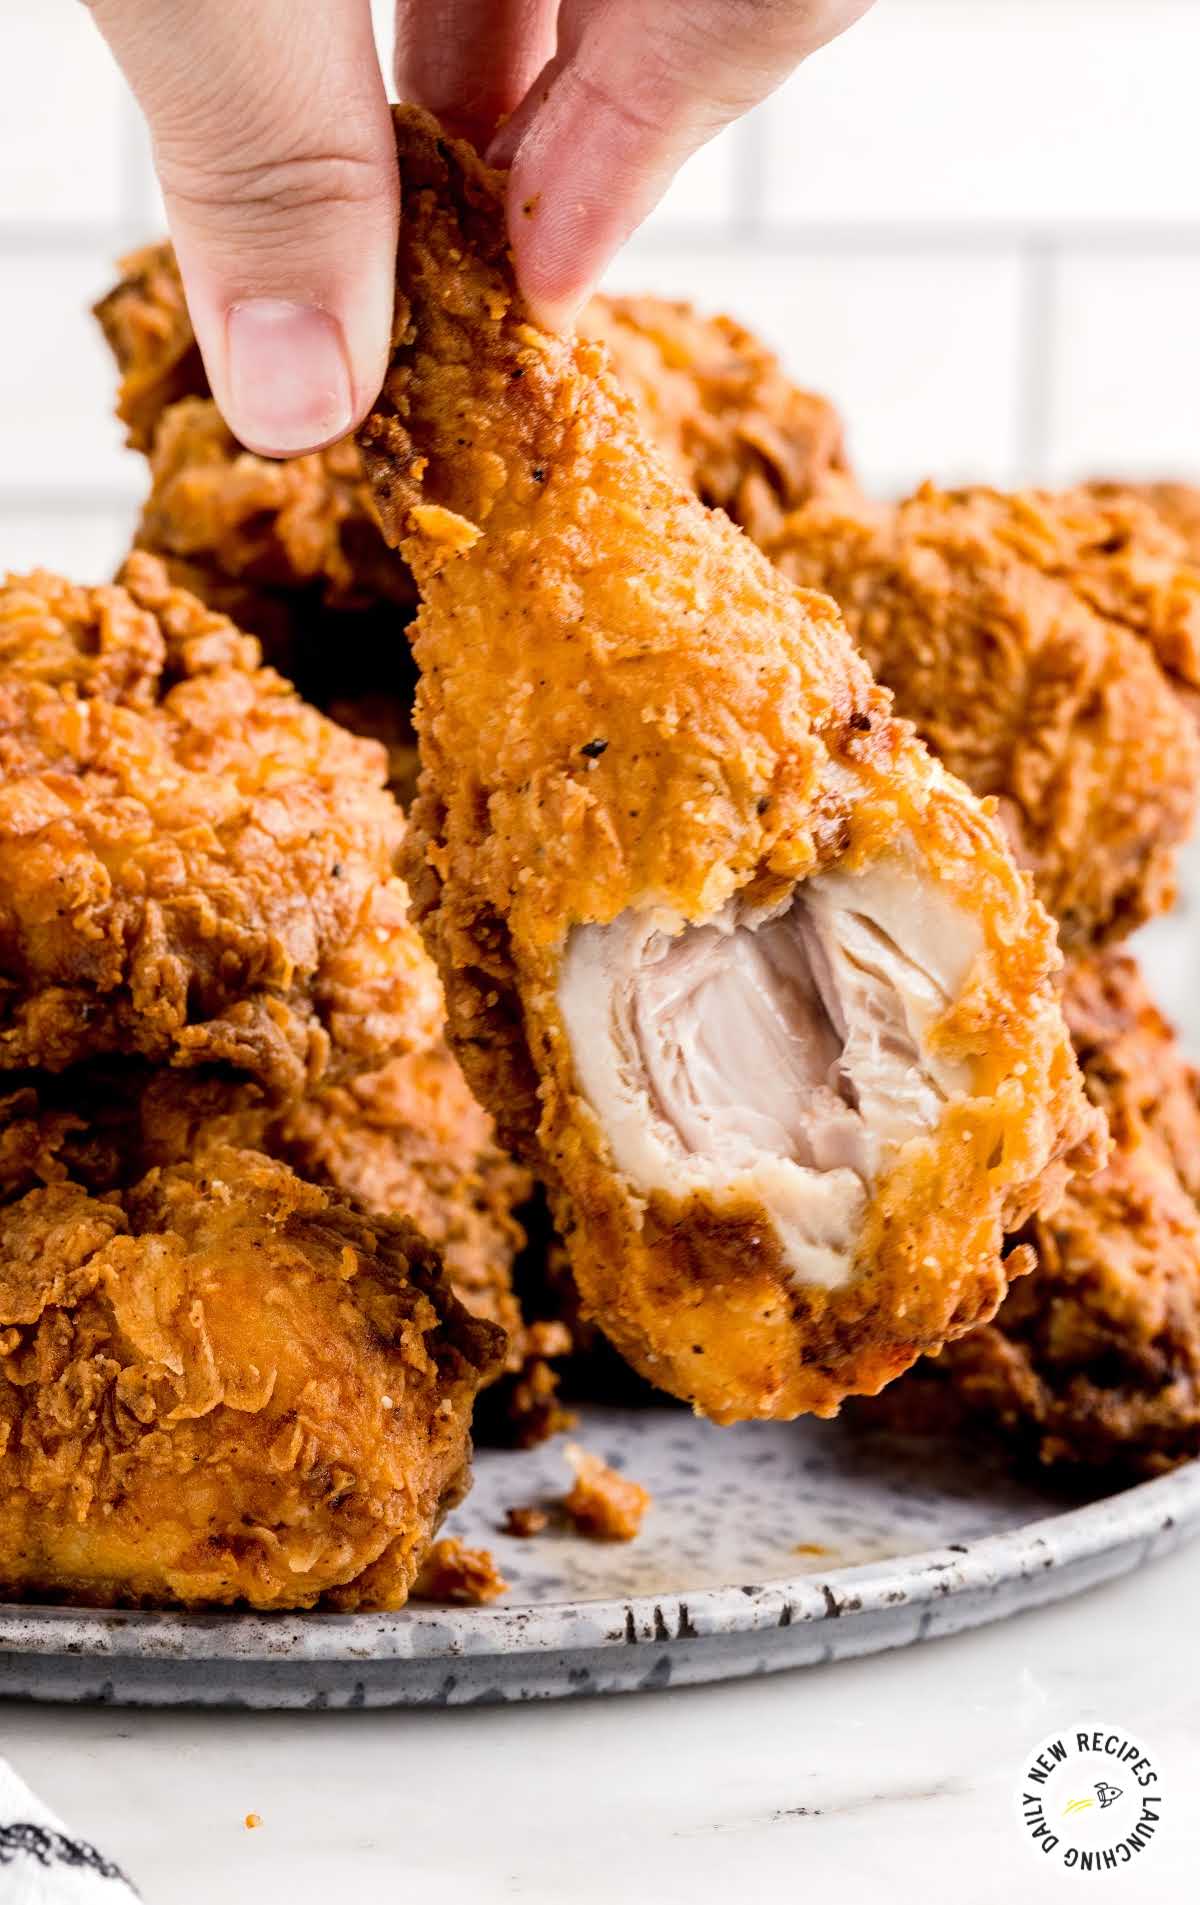 close up shot of a piece of Fried Chicken with a bite taken out of it